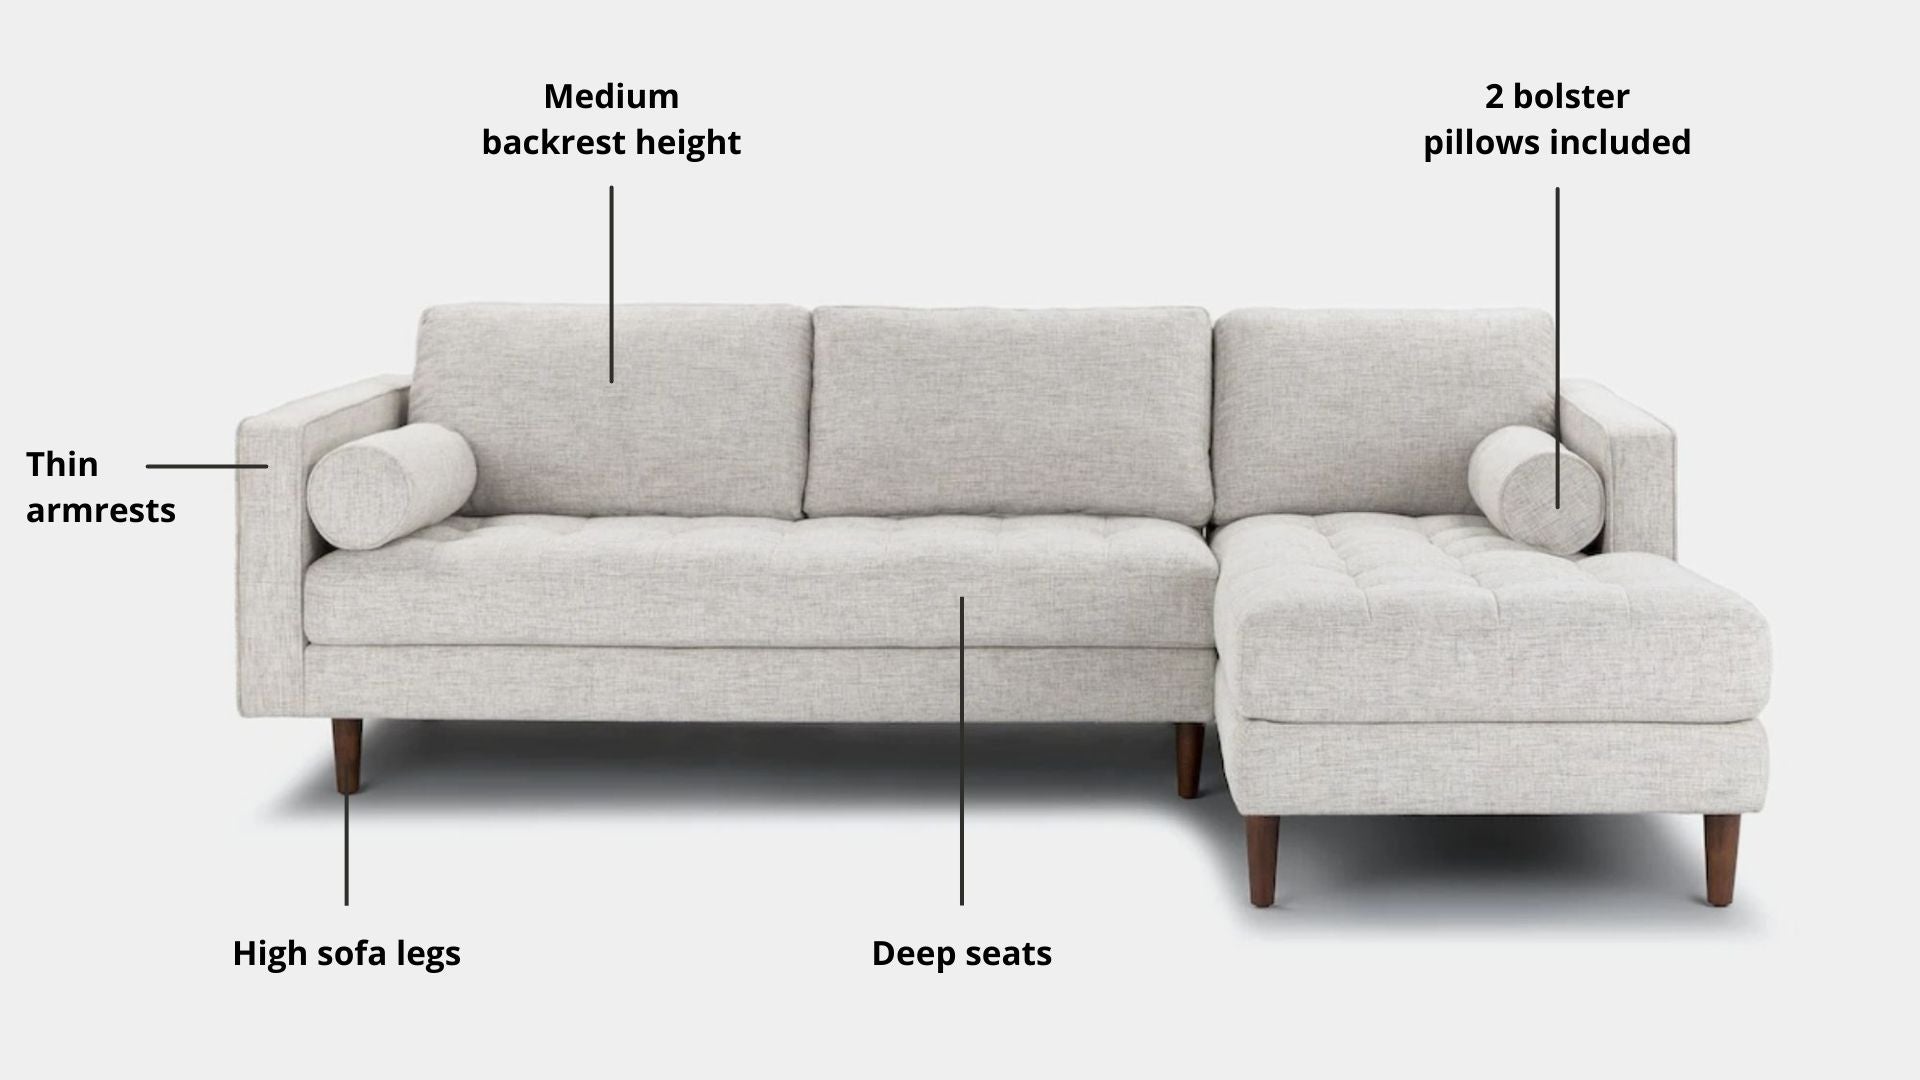 Key features such as armrest thickness, cushion height, seat depth and sofa leg height for Castle Fabric Sectional Sofa